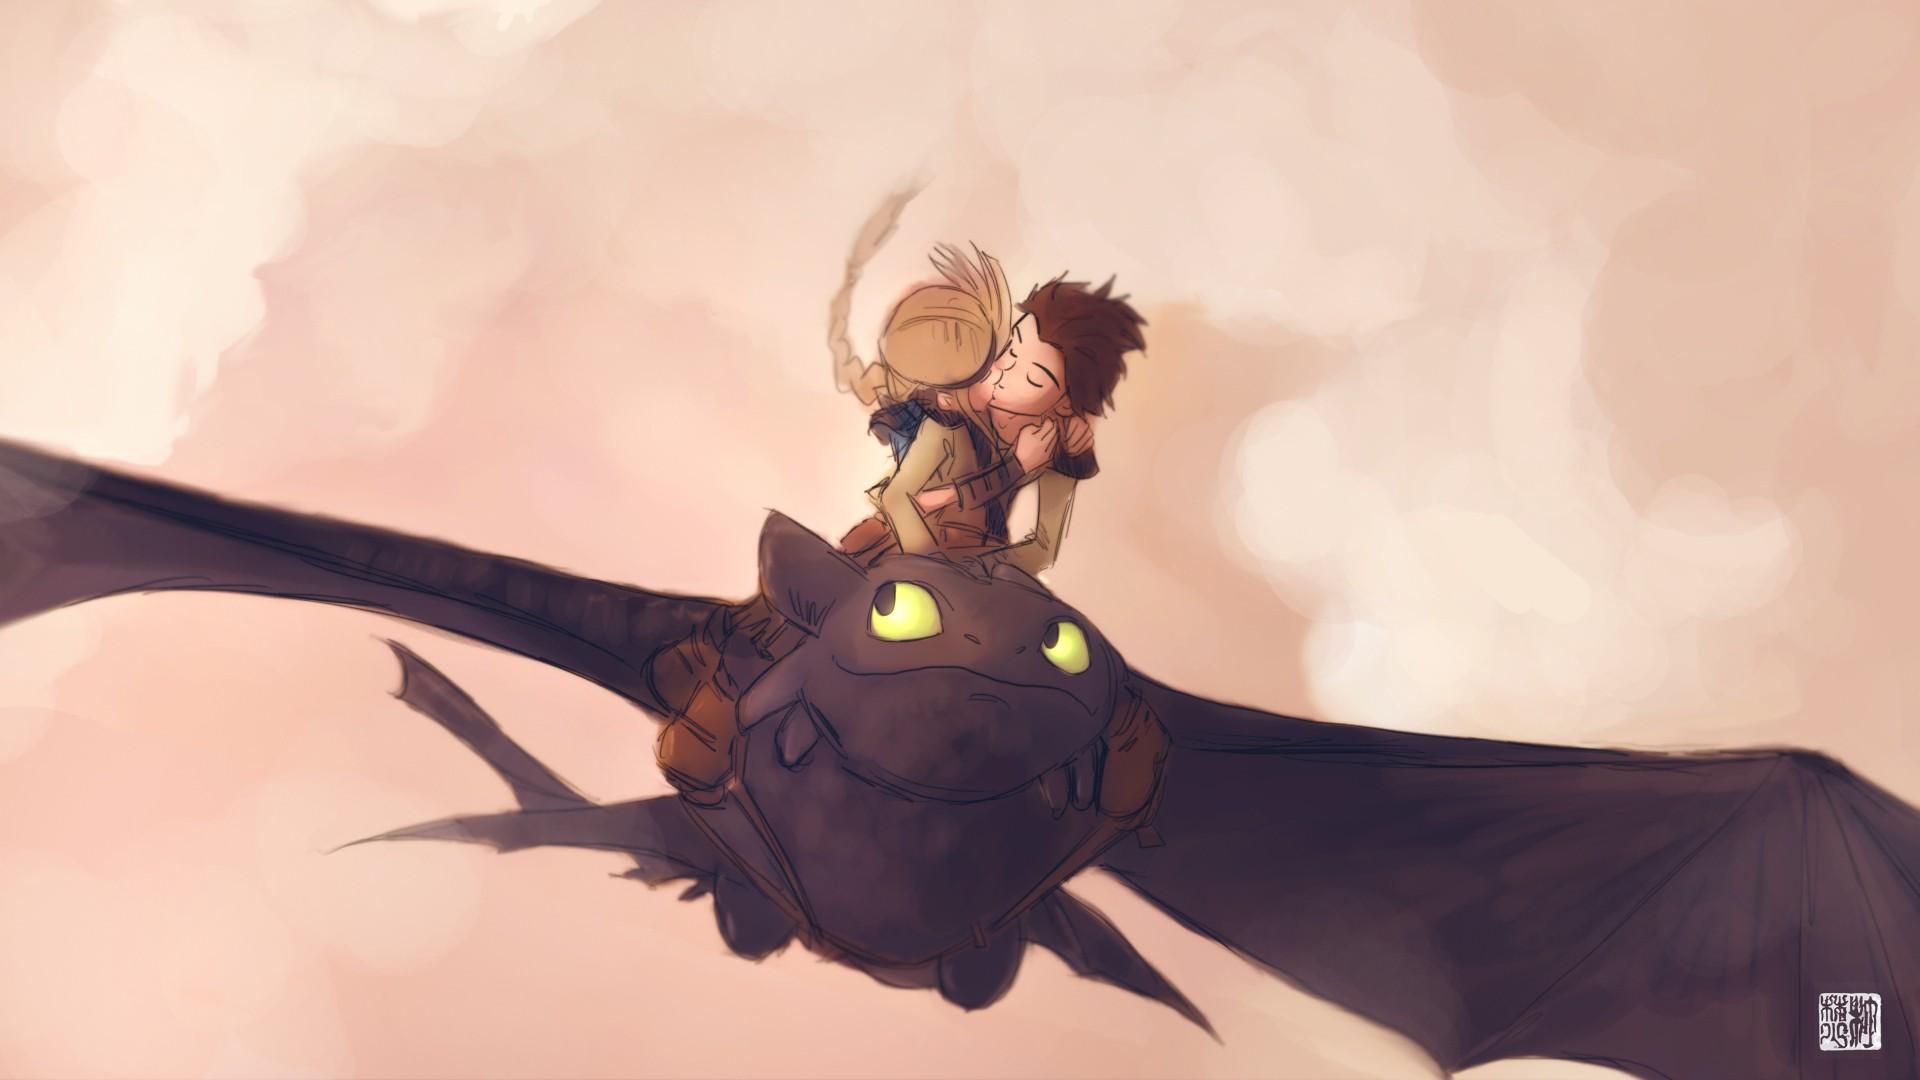 love, dragons, kissing, Hiccup, artwork, How to Train Your